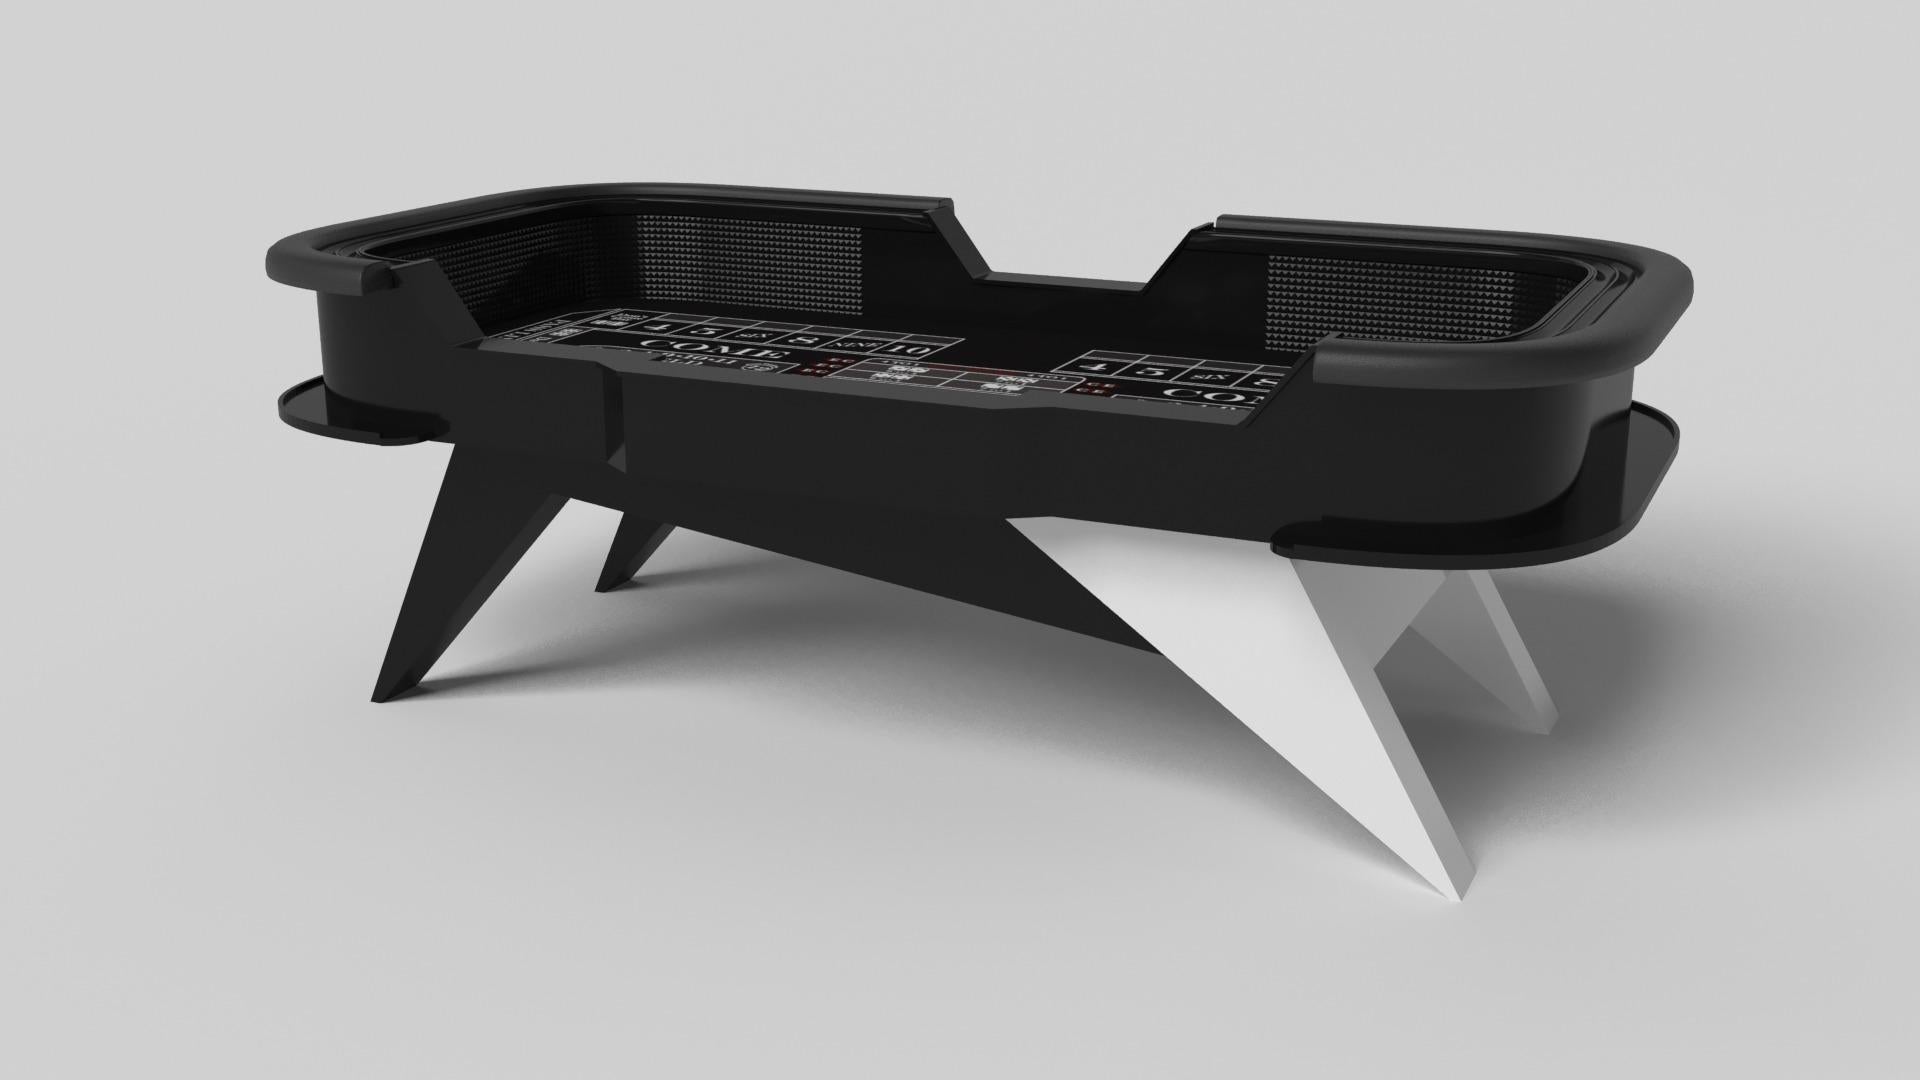 Simple yet sophisticated, the Mantis craps table puts a fresh, modern spin on a classic four-legged design. Sharp angles and tapered legs provide sleek stability.

Size:

117”X60”X42”
Custom Sizes Available Per Request